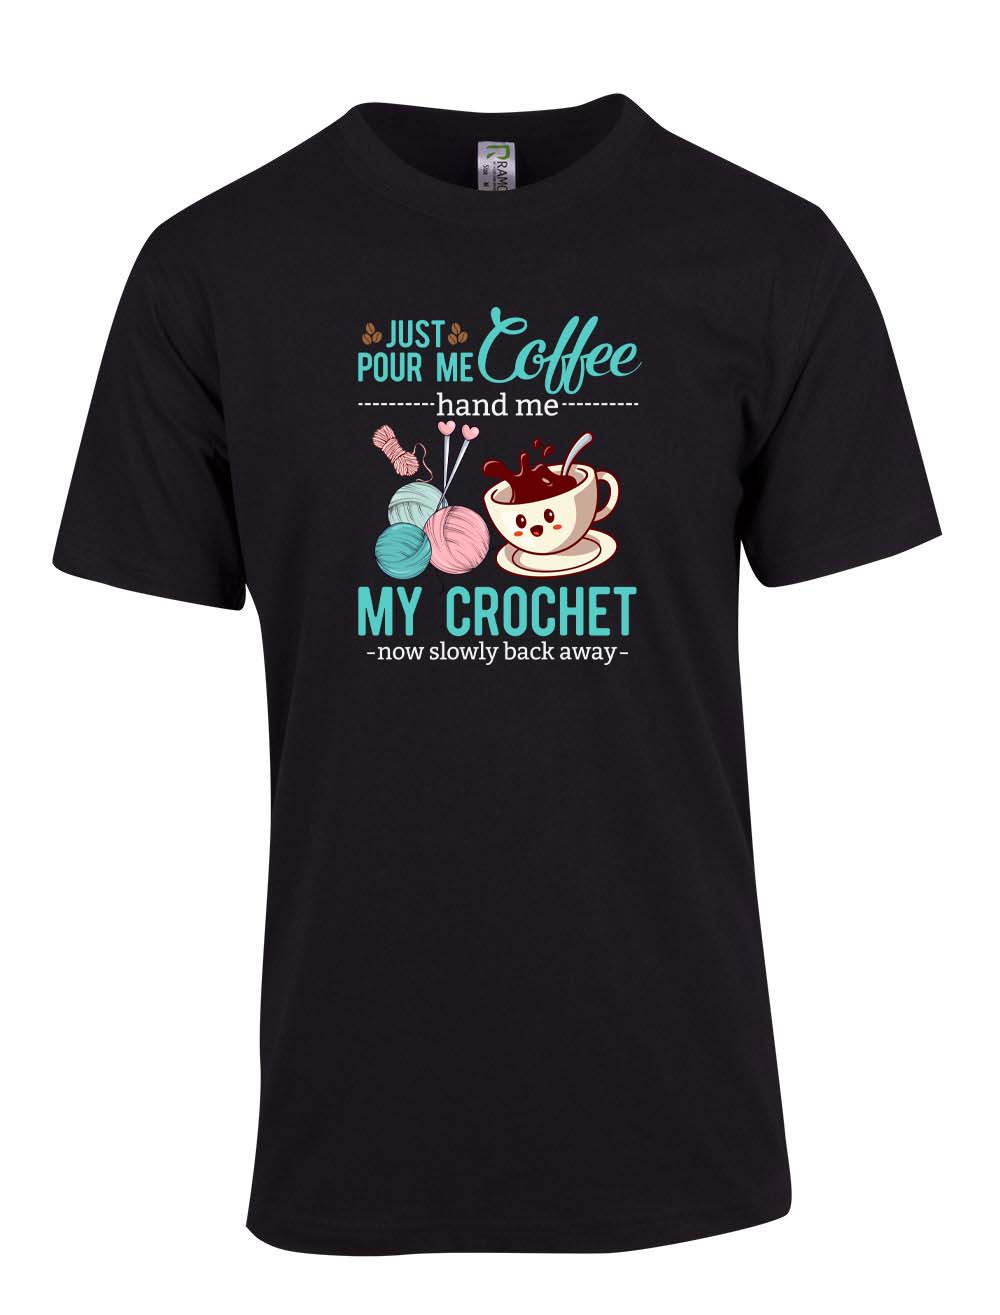 Just Pour me Coffee and hand me my Crochet T-Shirt